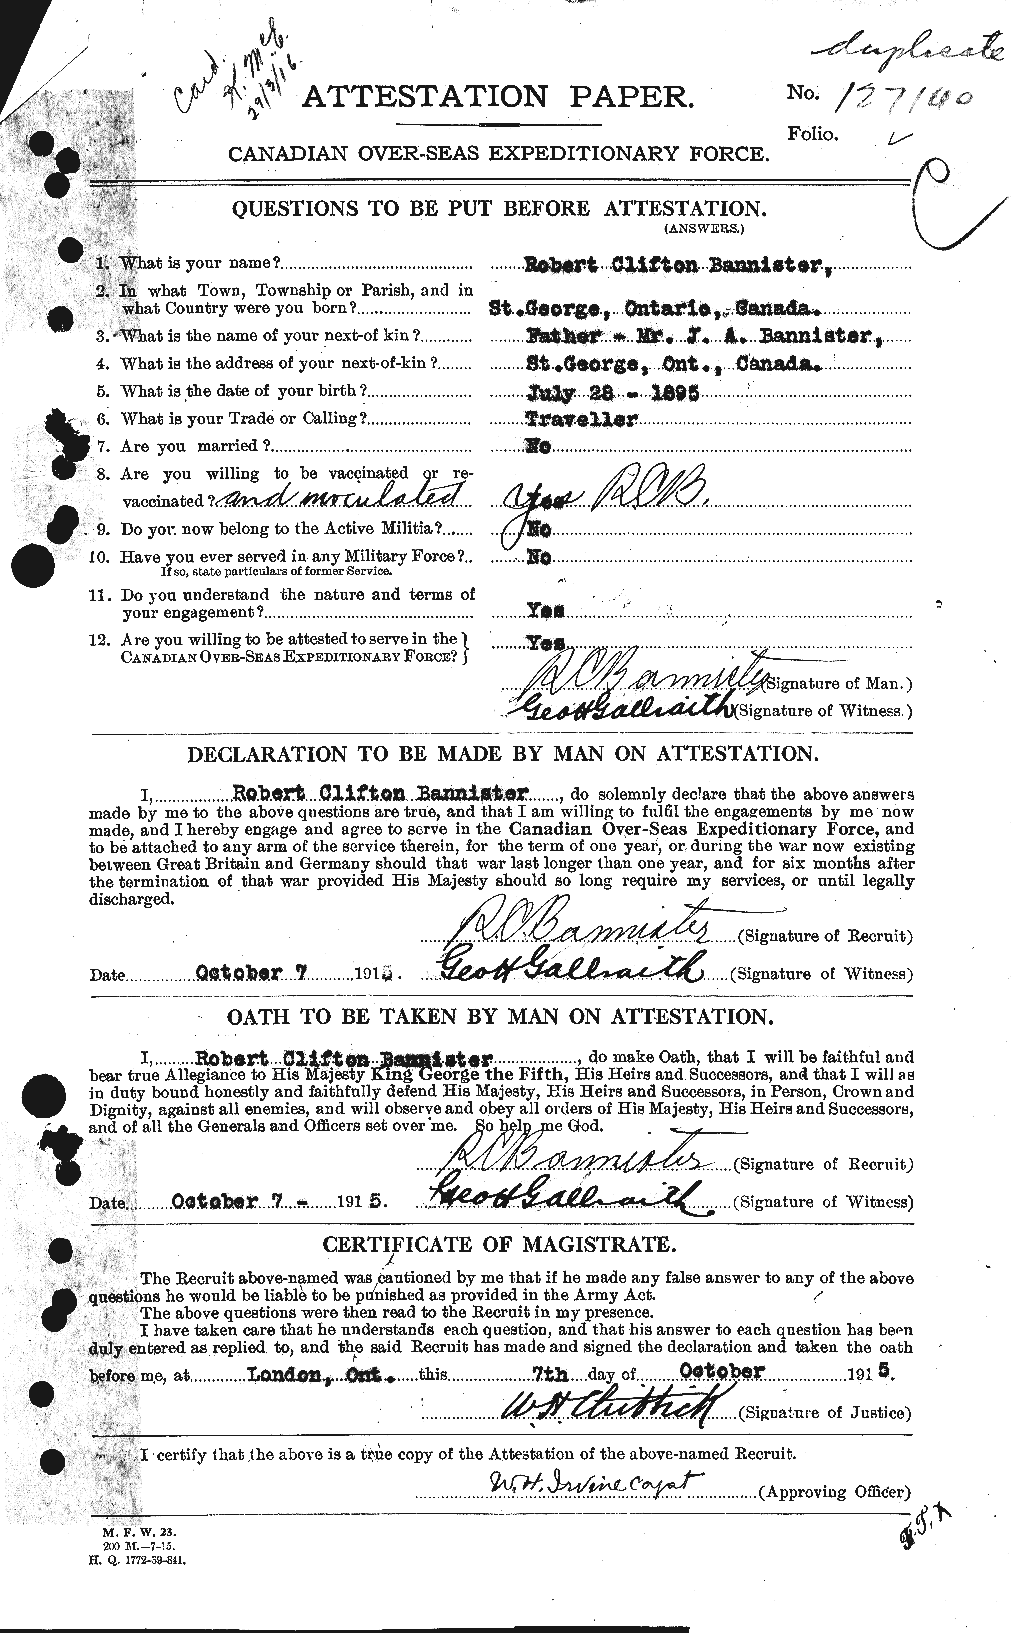 Personnel Records of the First World War - CEF 224768a